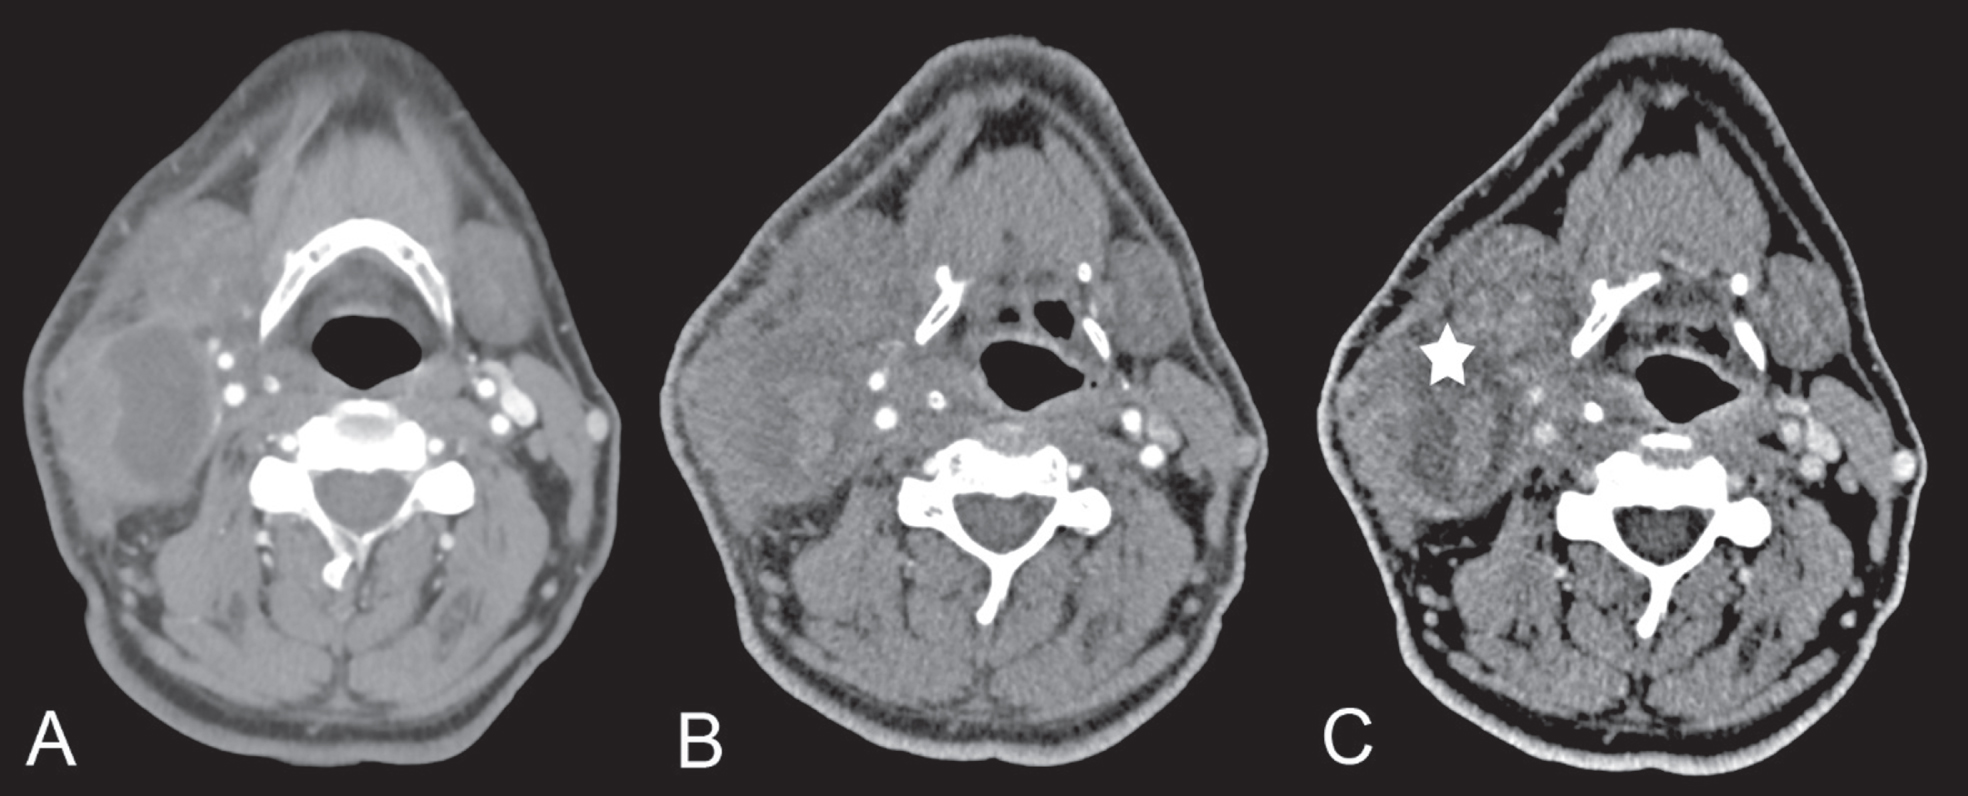 A shows the lesion in CT before the US-CNB and Fig. 5 B and C represent the CT in arterial (B) and venous phase (C) which was performed after the US-CNB to potentially detect the bleeding site (but no acute bleeding was detected) and to document the hematoma size (*) within the cystic part of the metastatic lymph node.